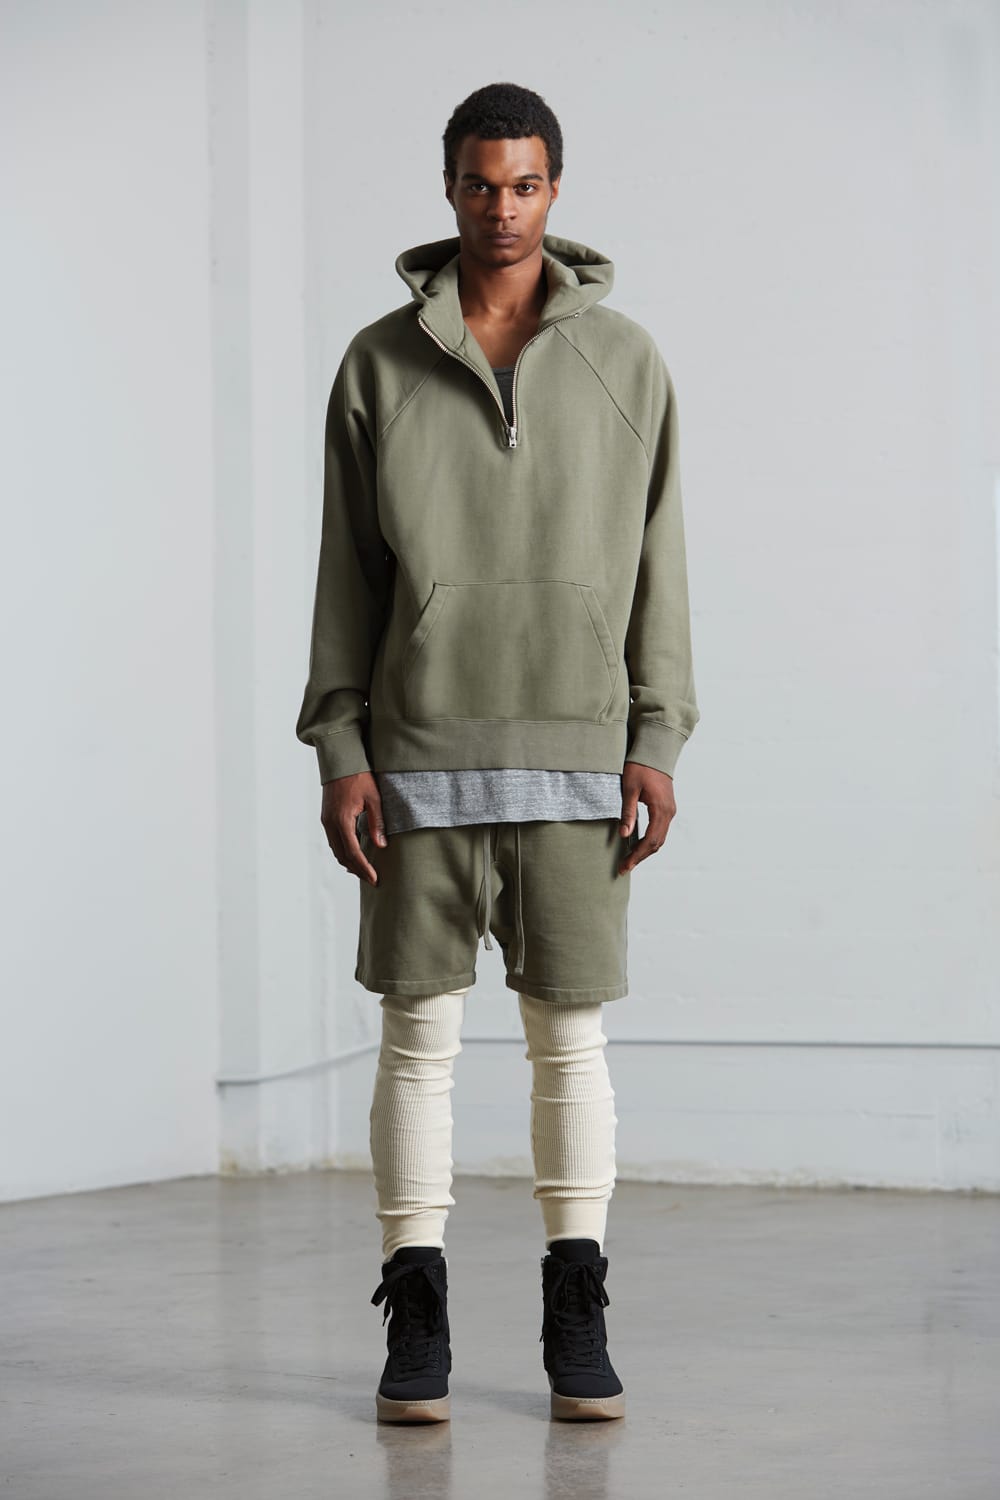 A Preview of Jerry Lorenzo's FOG x PacSun 